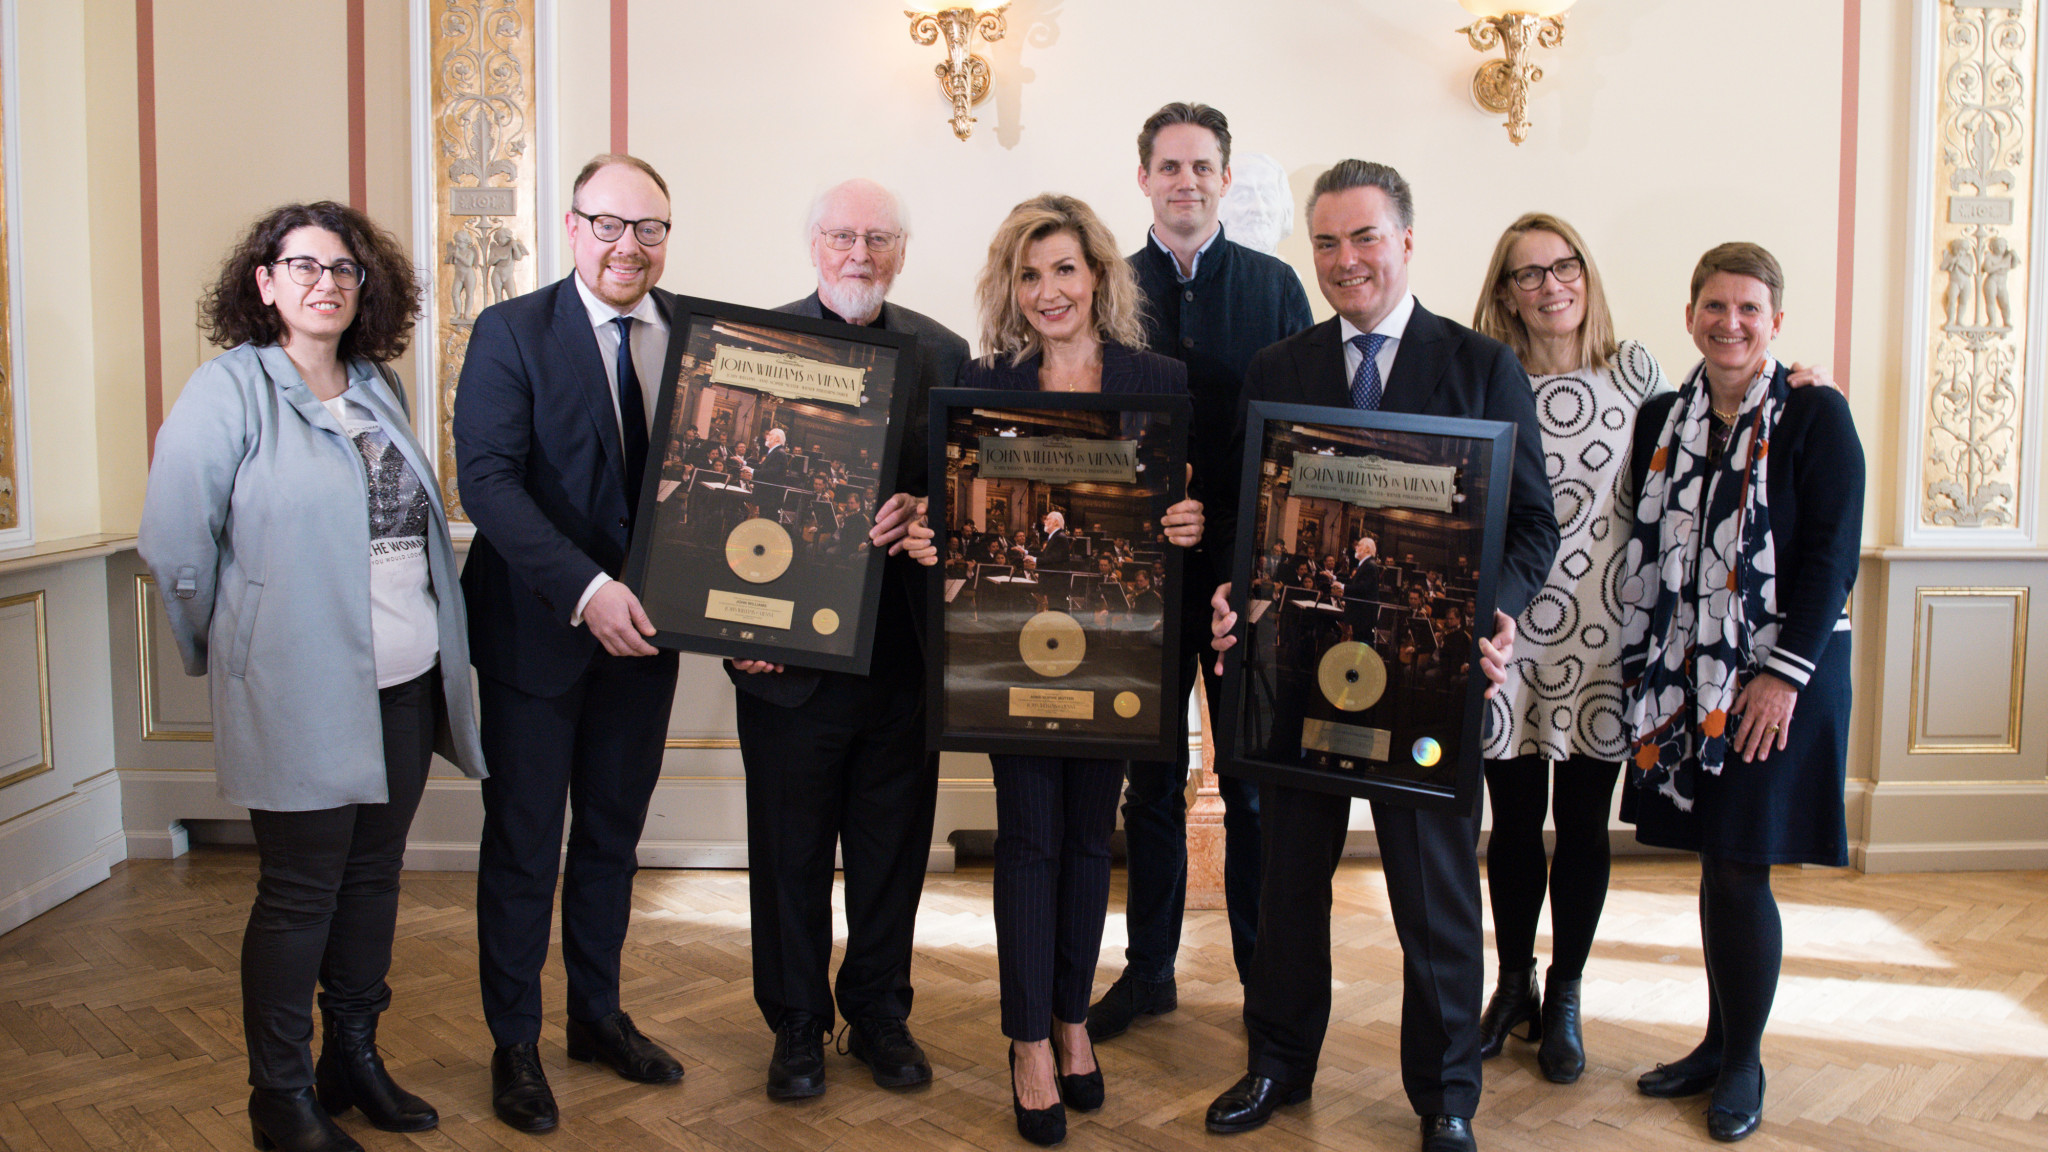 John Williams & the Wiener Philharmoniker Celebrate Star Wars Day With a Gold Record 